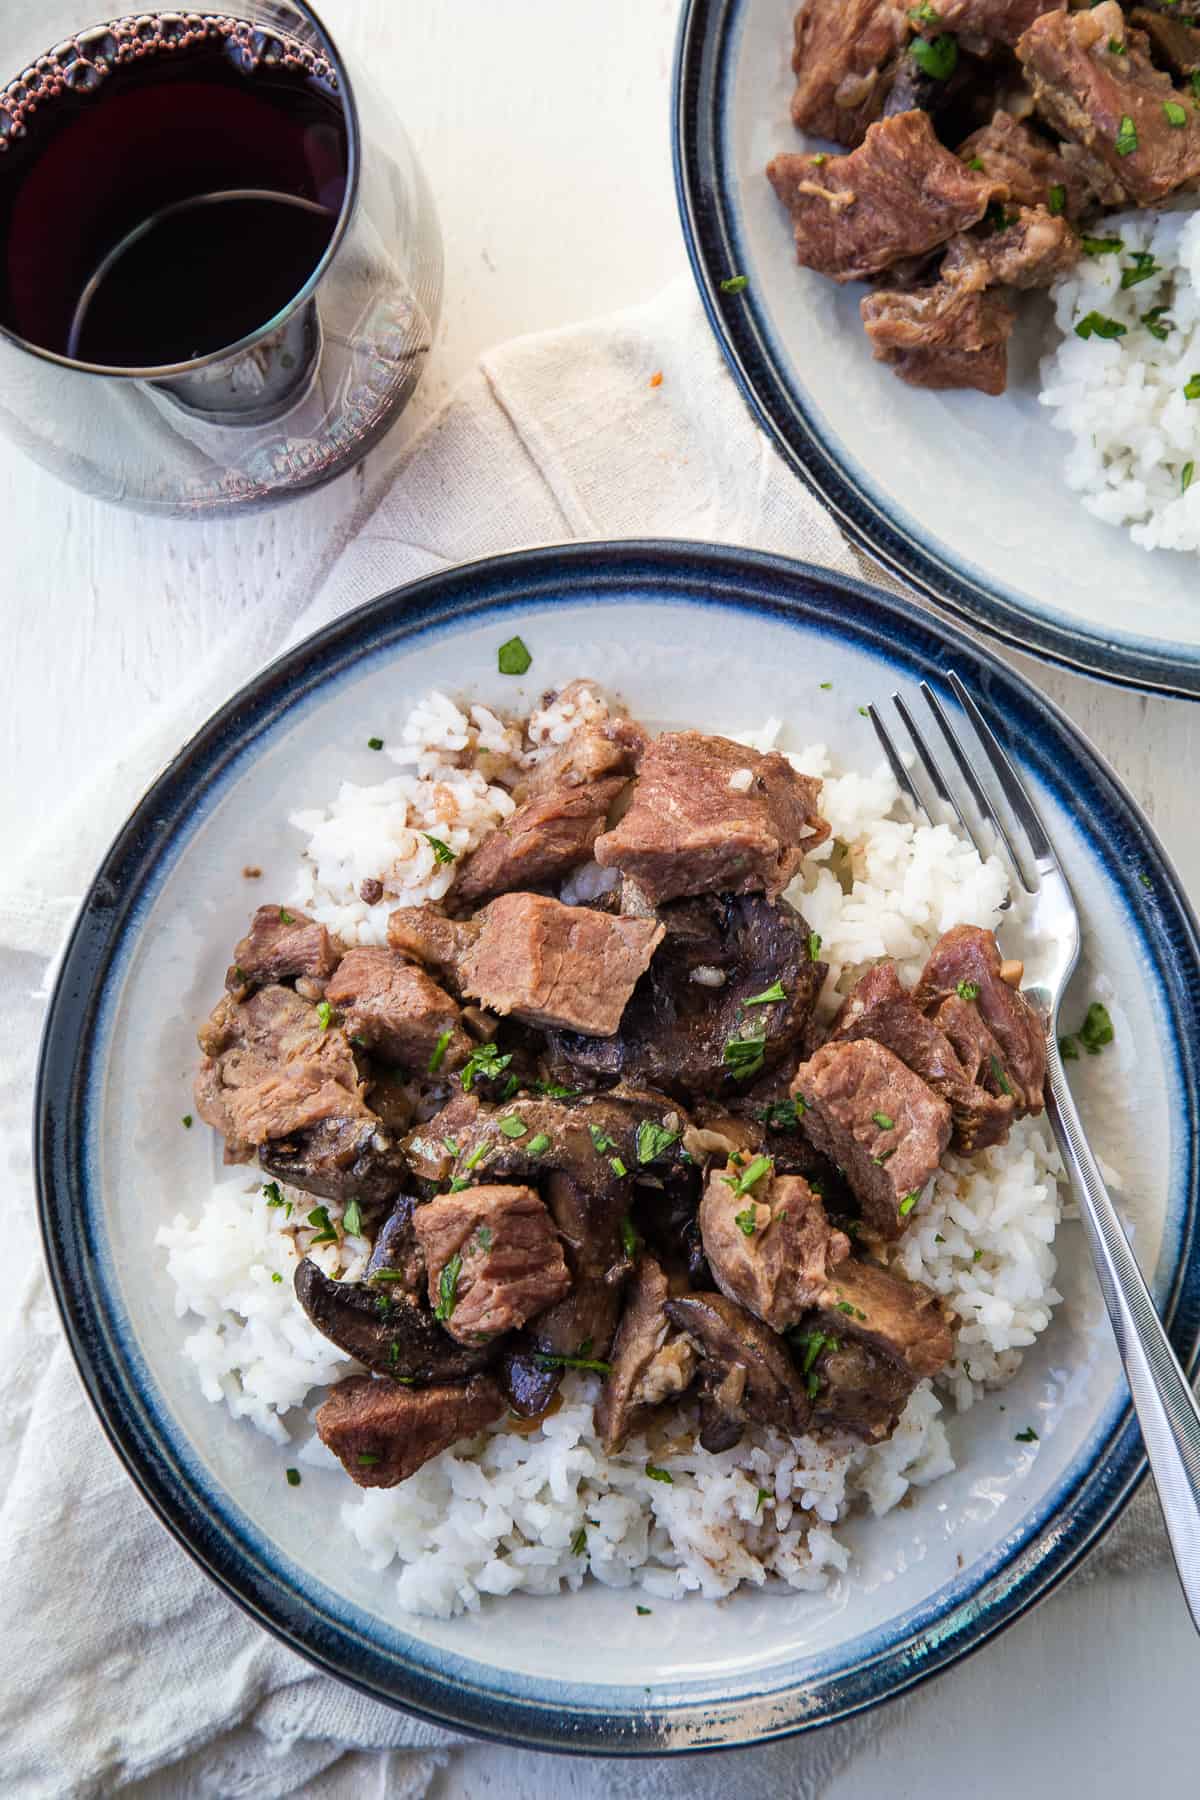 plate of beef stew on a bed of white rice on a blue rimmed plate, next to a glass of red wine.